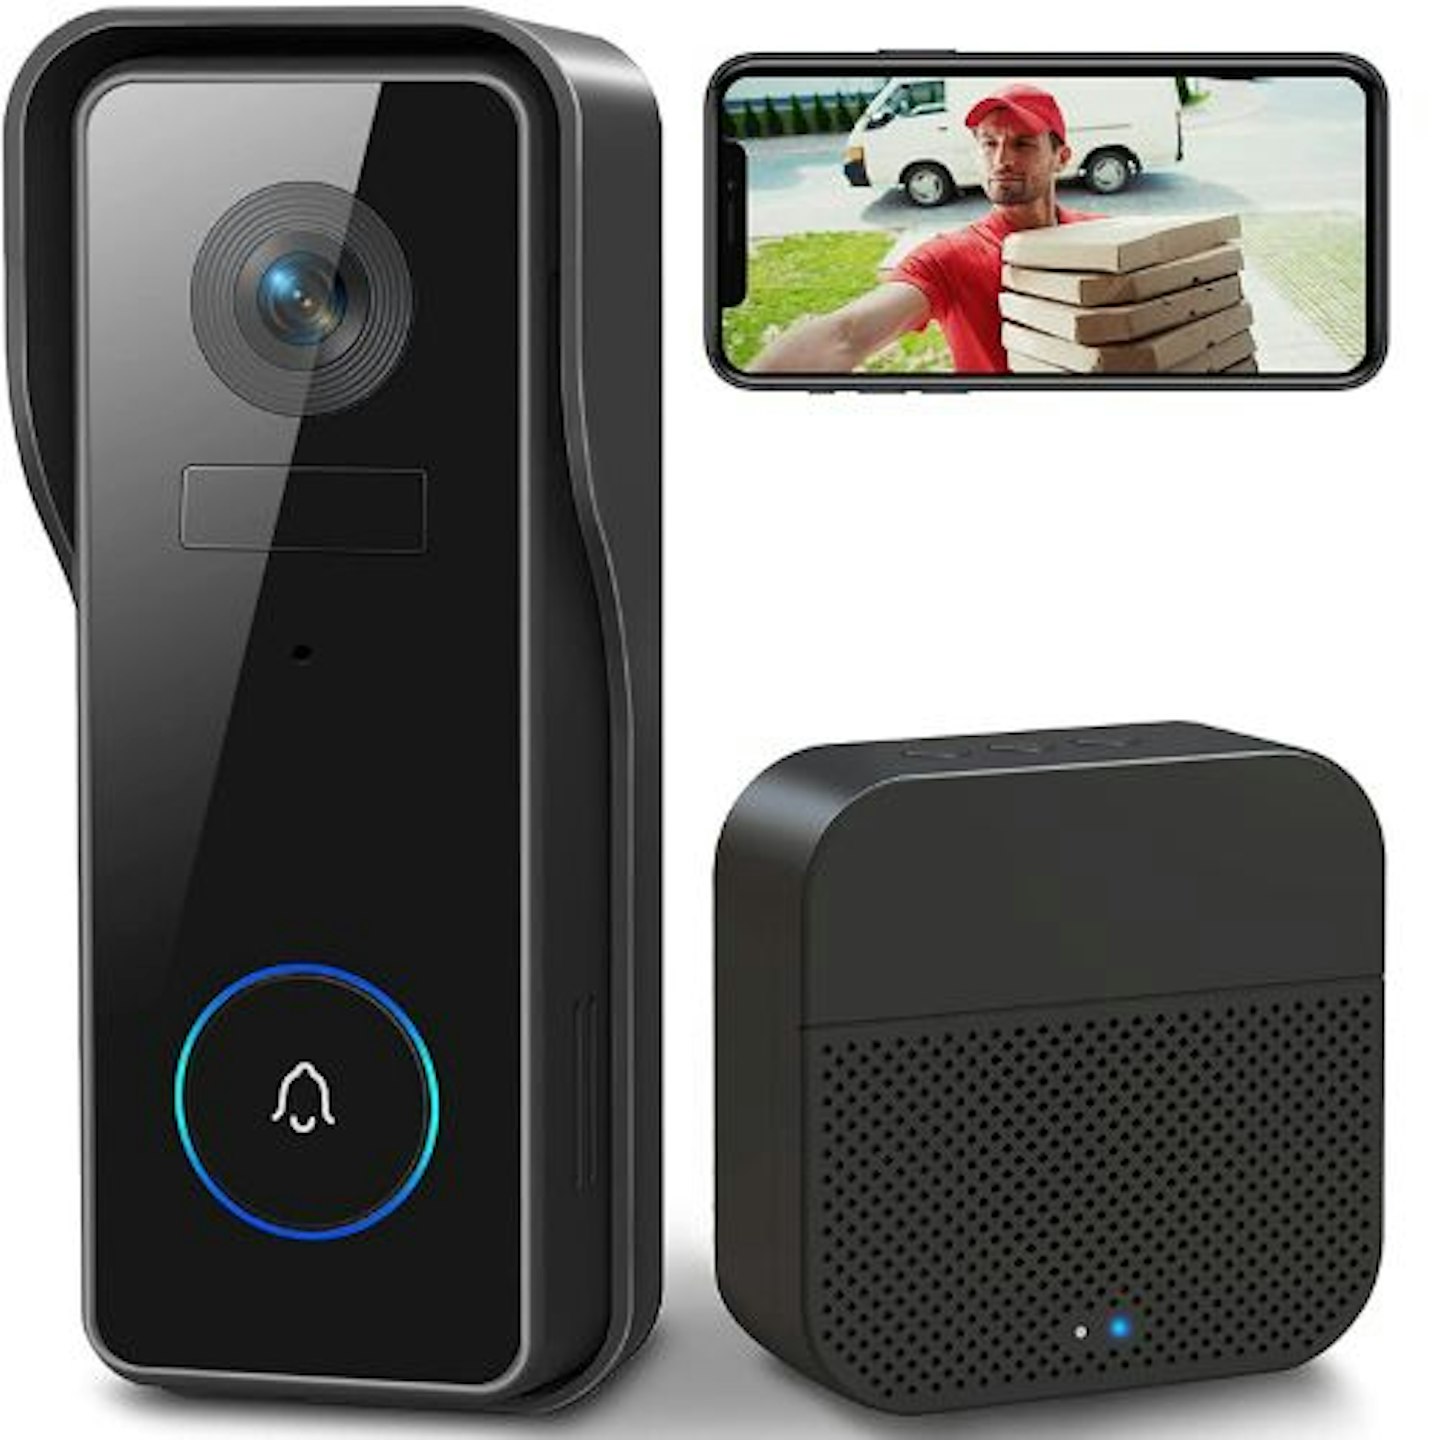 Wireless WiFi Video Doorbell Camera with Chime